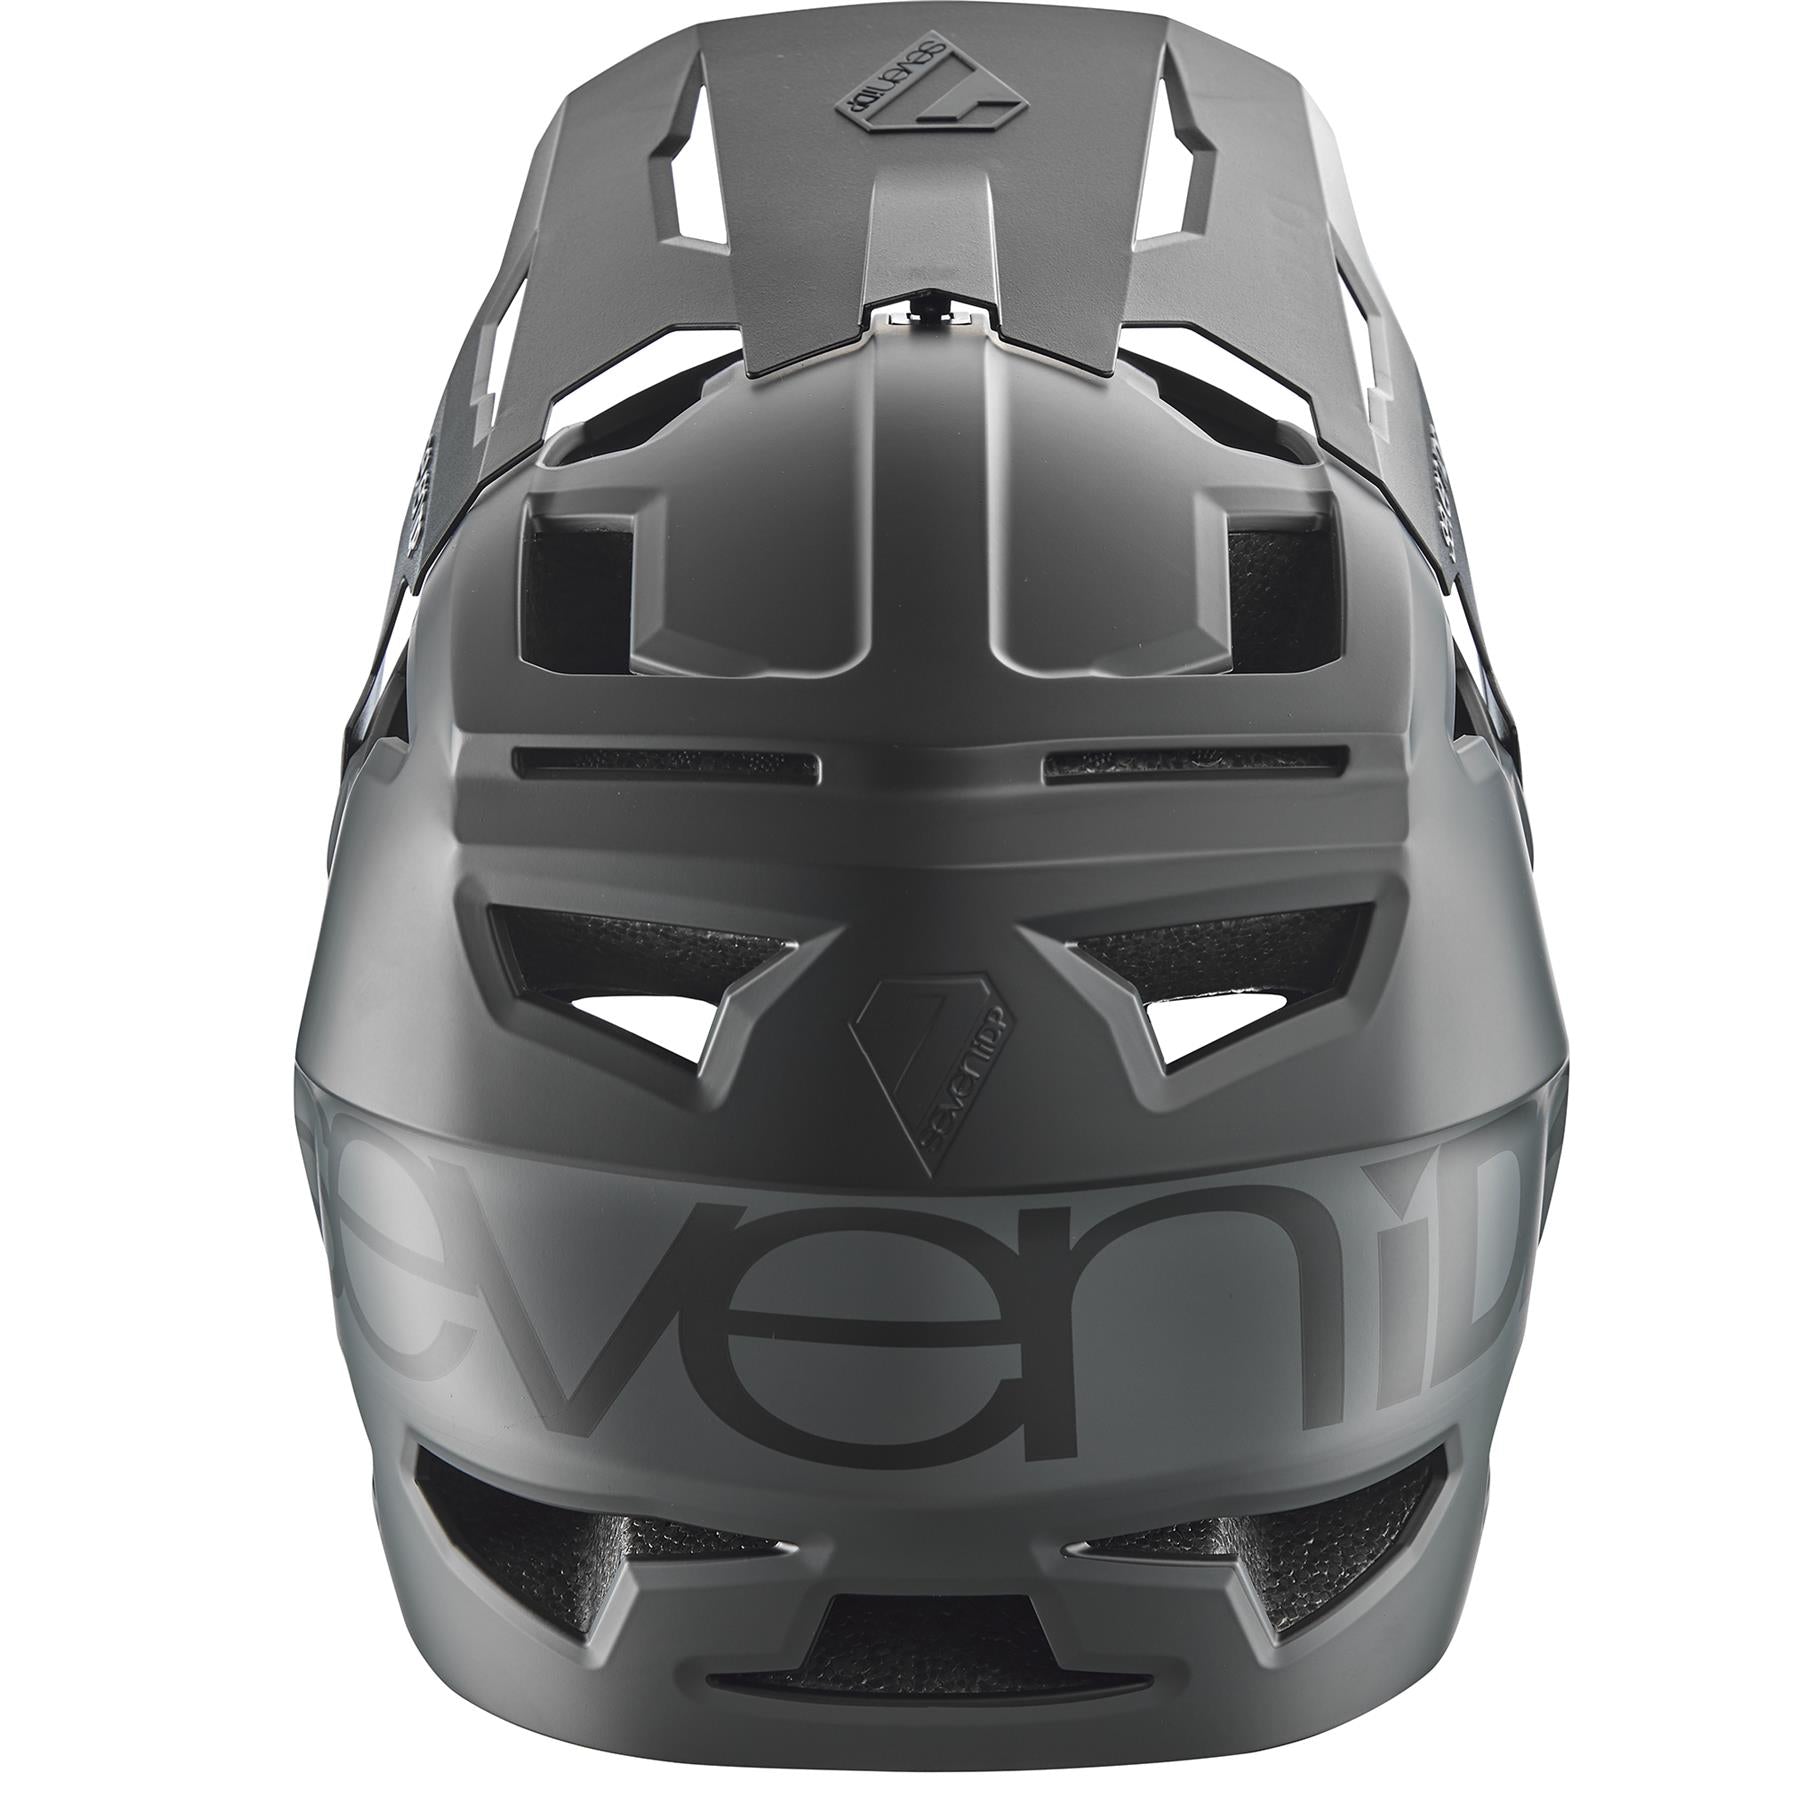 Seven iDP Project 23 ABS Race Helm - Black